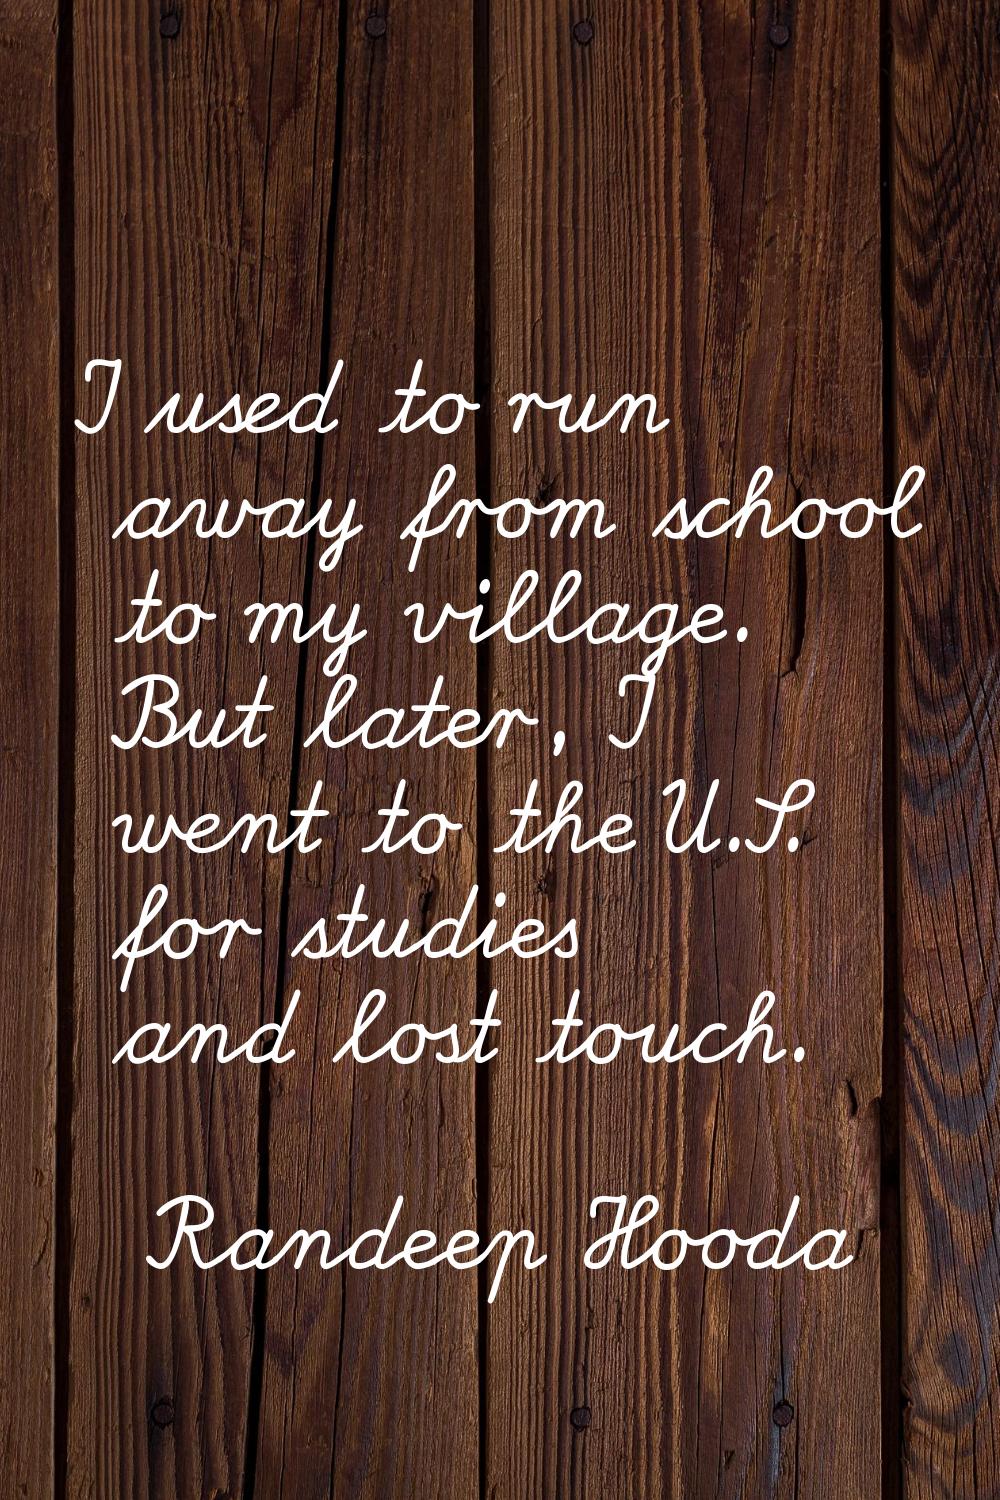 I used to run away from school to my village. But later, I went to the U.S. for studies and lost to